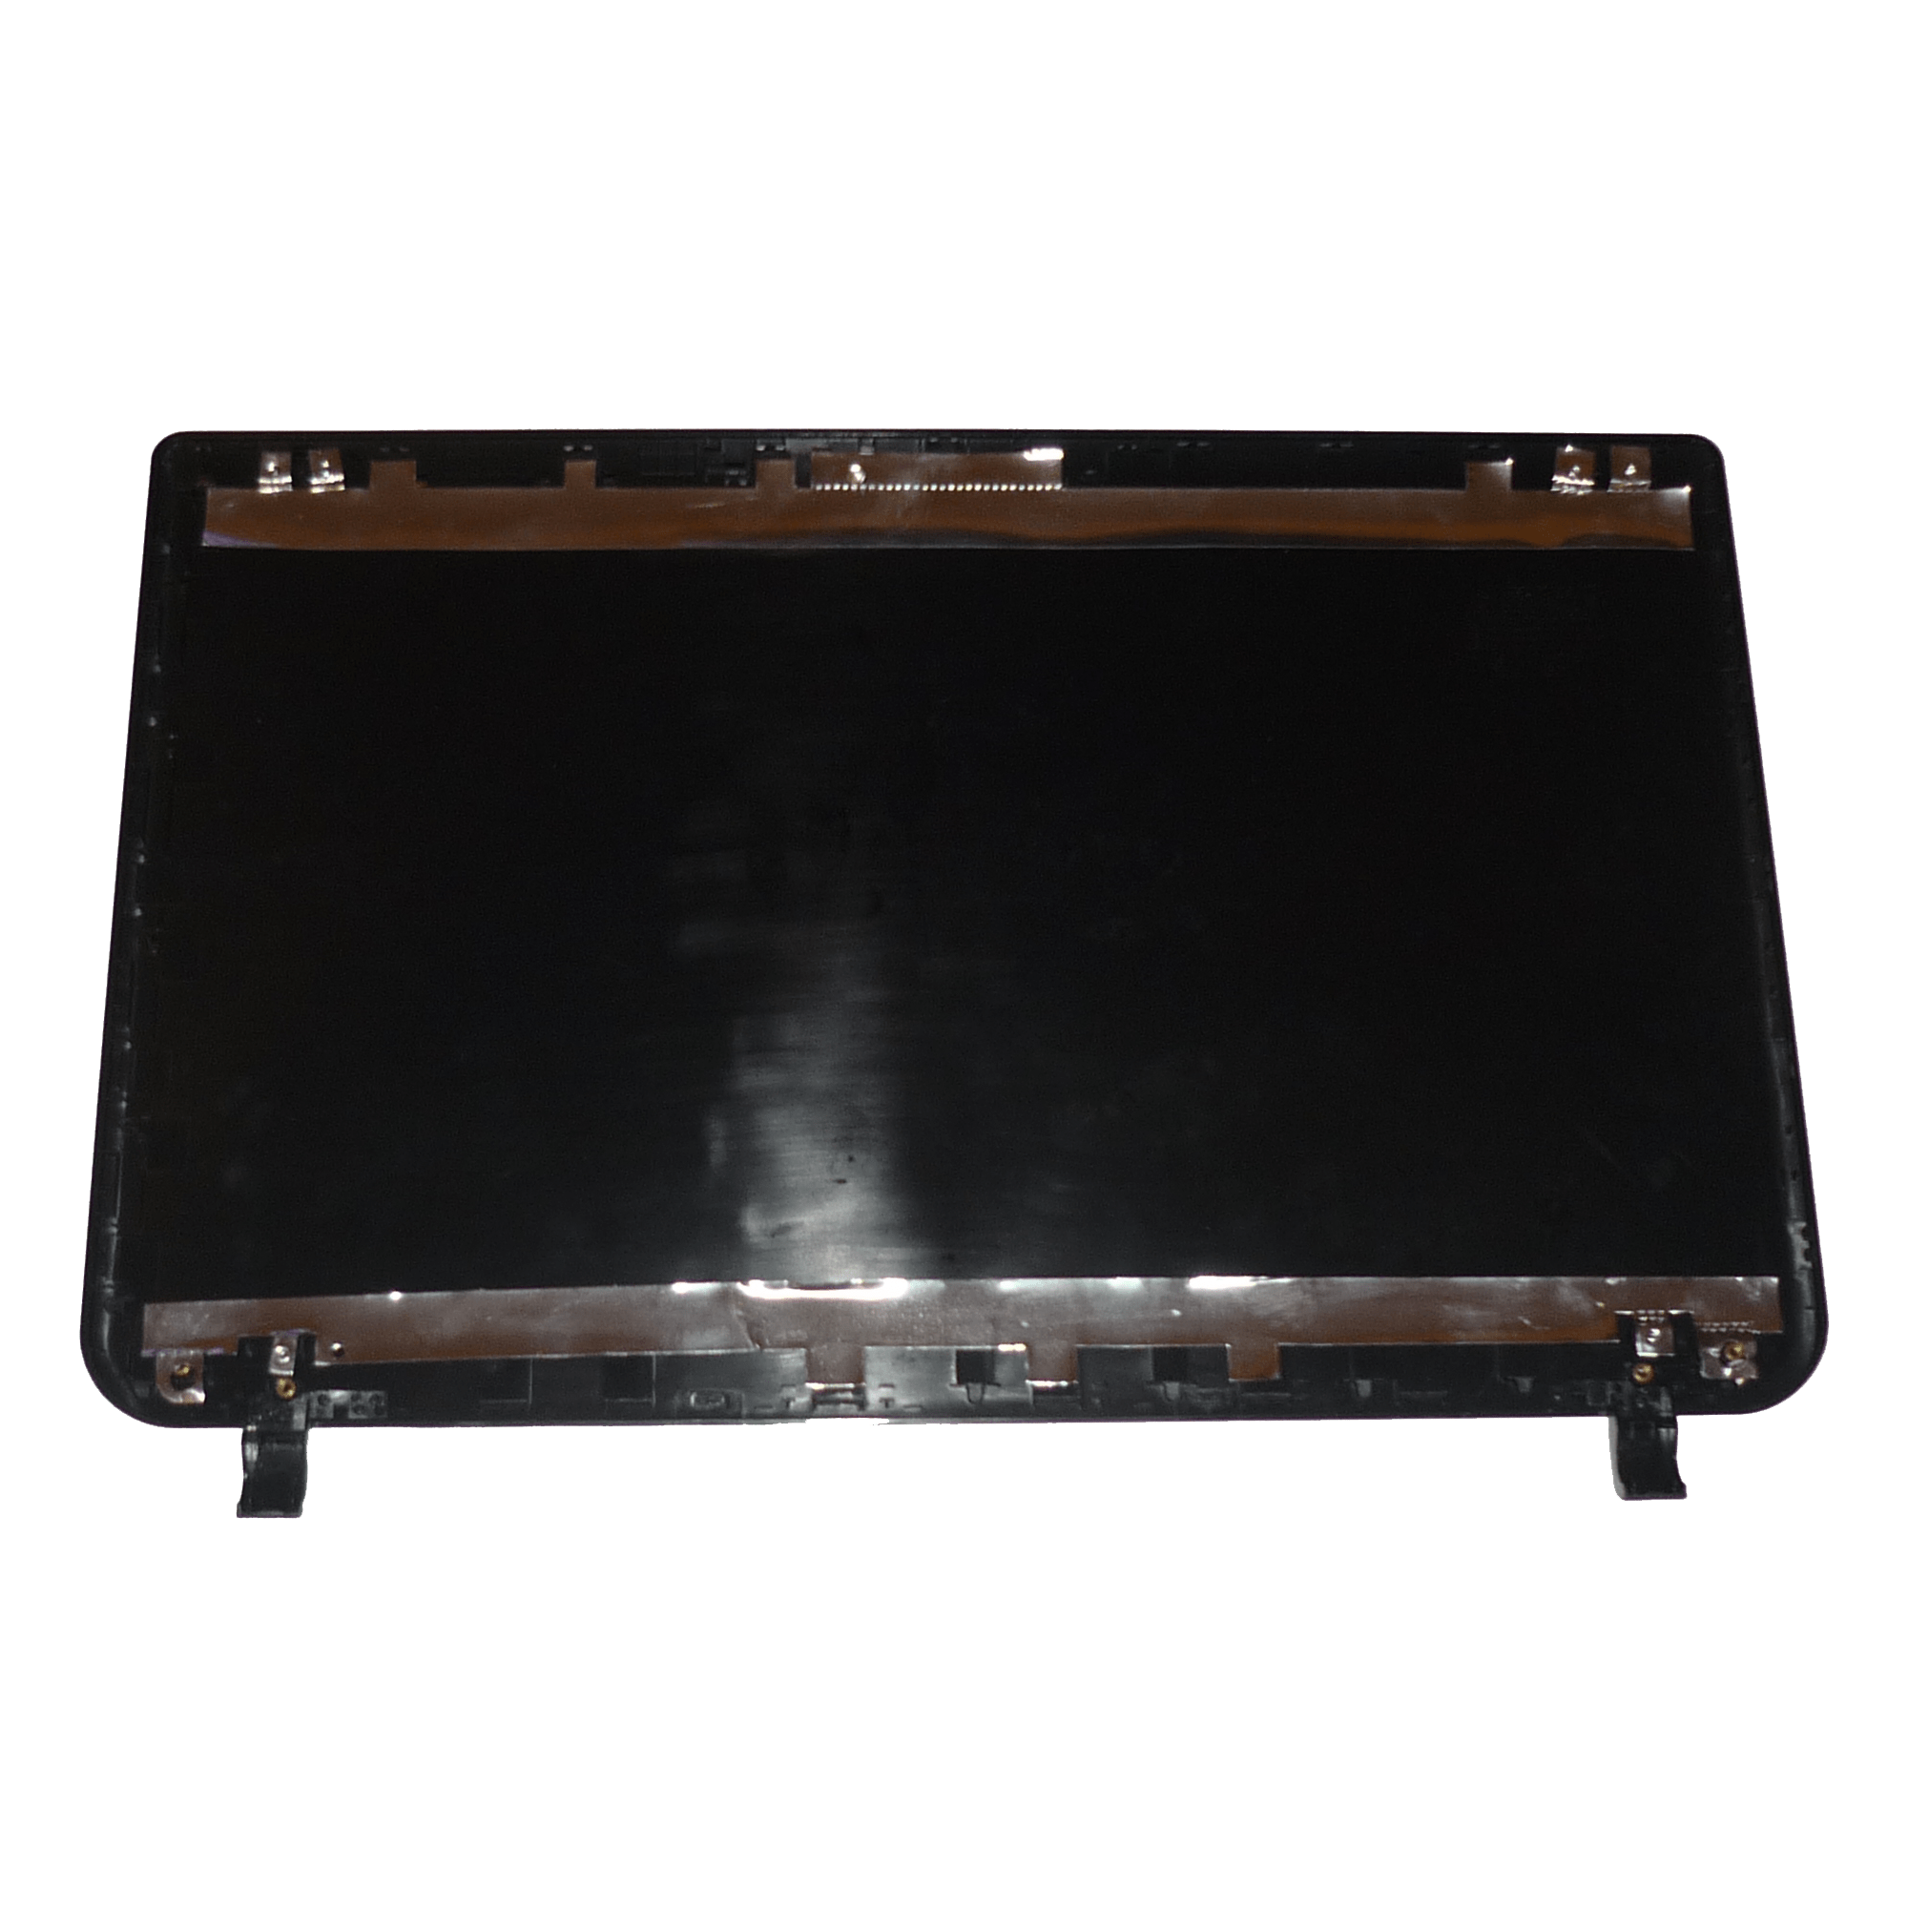 Toshiba Top Lid Rear Back Cover Gloss Black Part Number: A000291030 Compatible Models : Satellite L50-B Part Description : New Top Lid Rear Back Cover Gloss Black for Toshiba Satellite. 1 Year Warranty